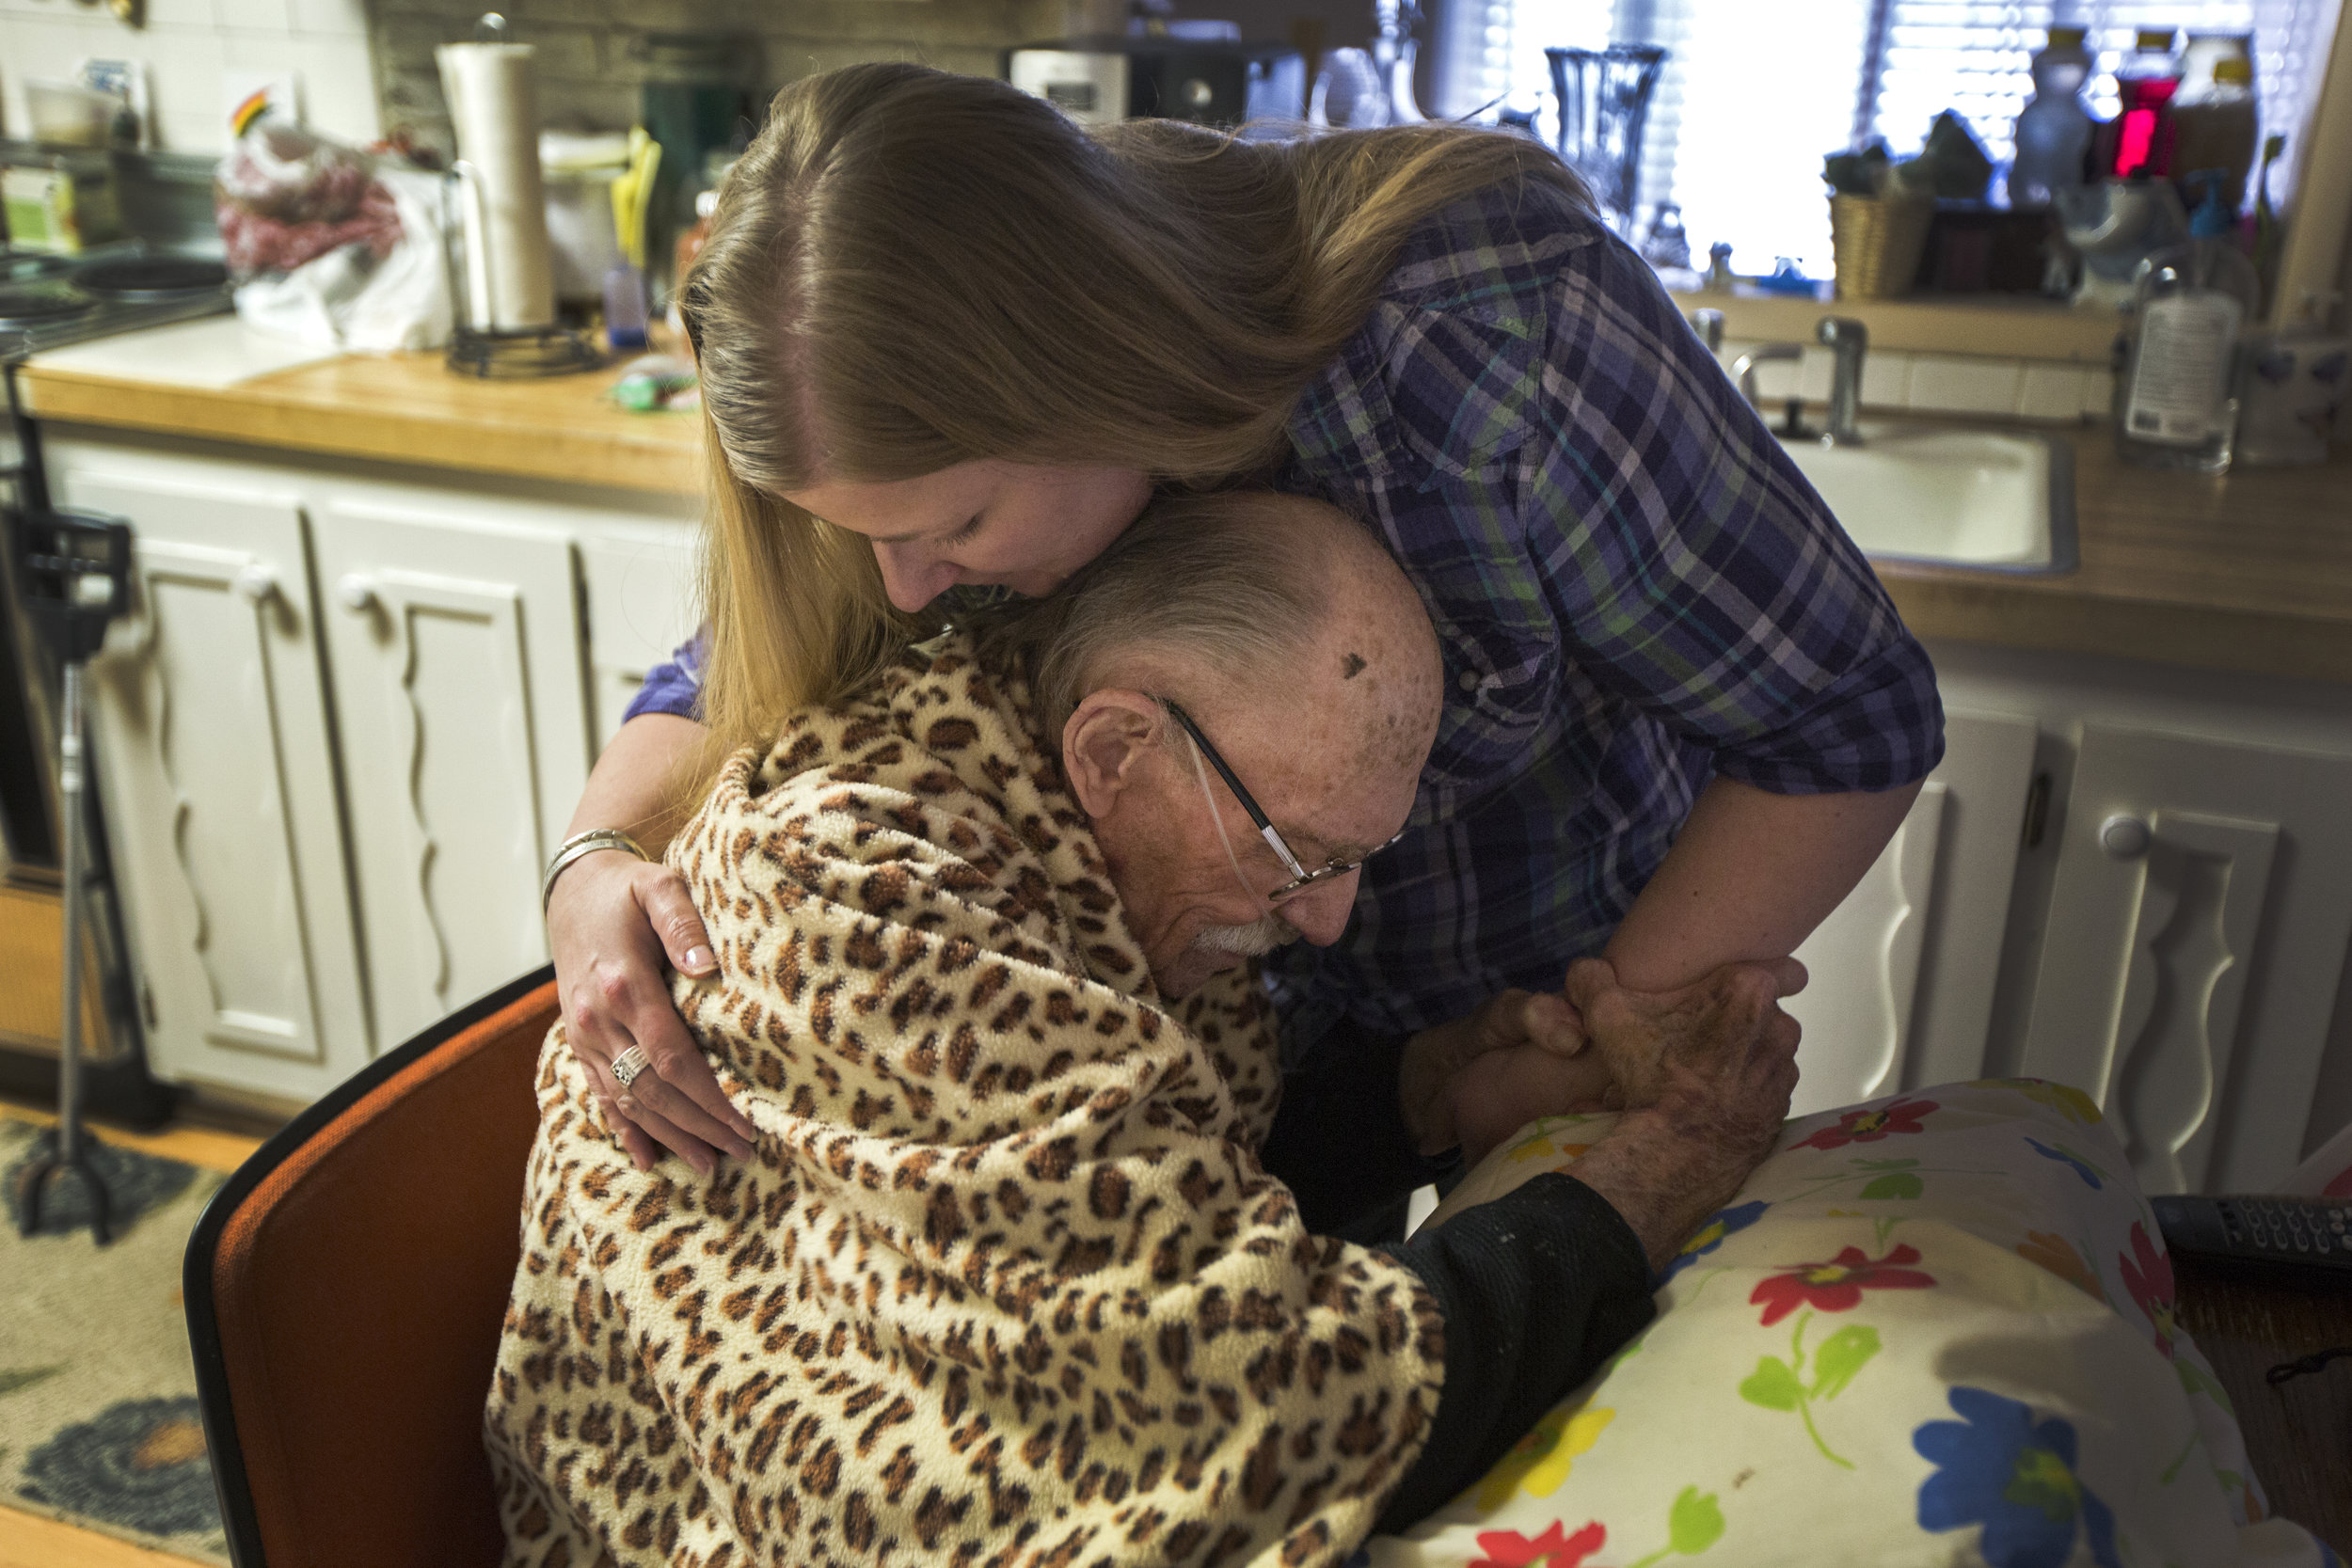  “It’s rough,” Jasmine Parker said about taking care of her father. “I don’t know if it’s going to be weeks or months. I mean I feel like he doesn’t have that much longer to go.” The Lehi resident said this Jan. 27 about her 79-year-old father, Richa